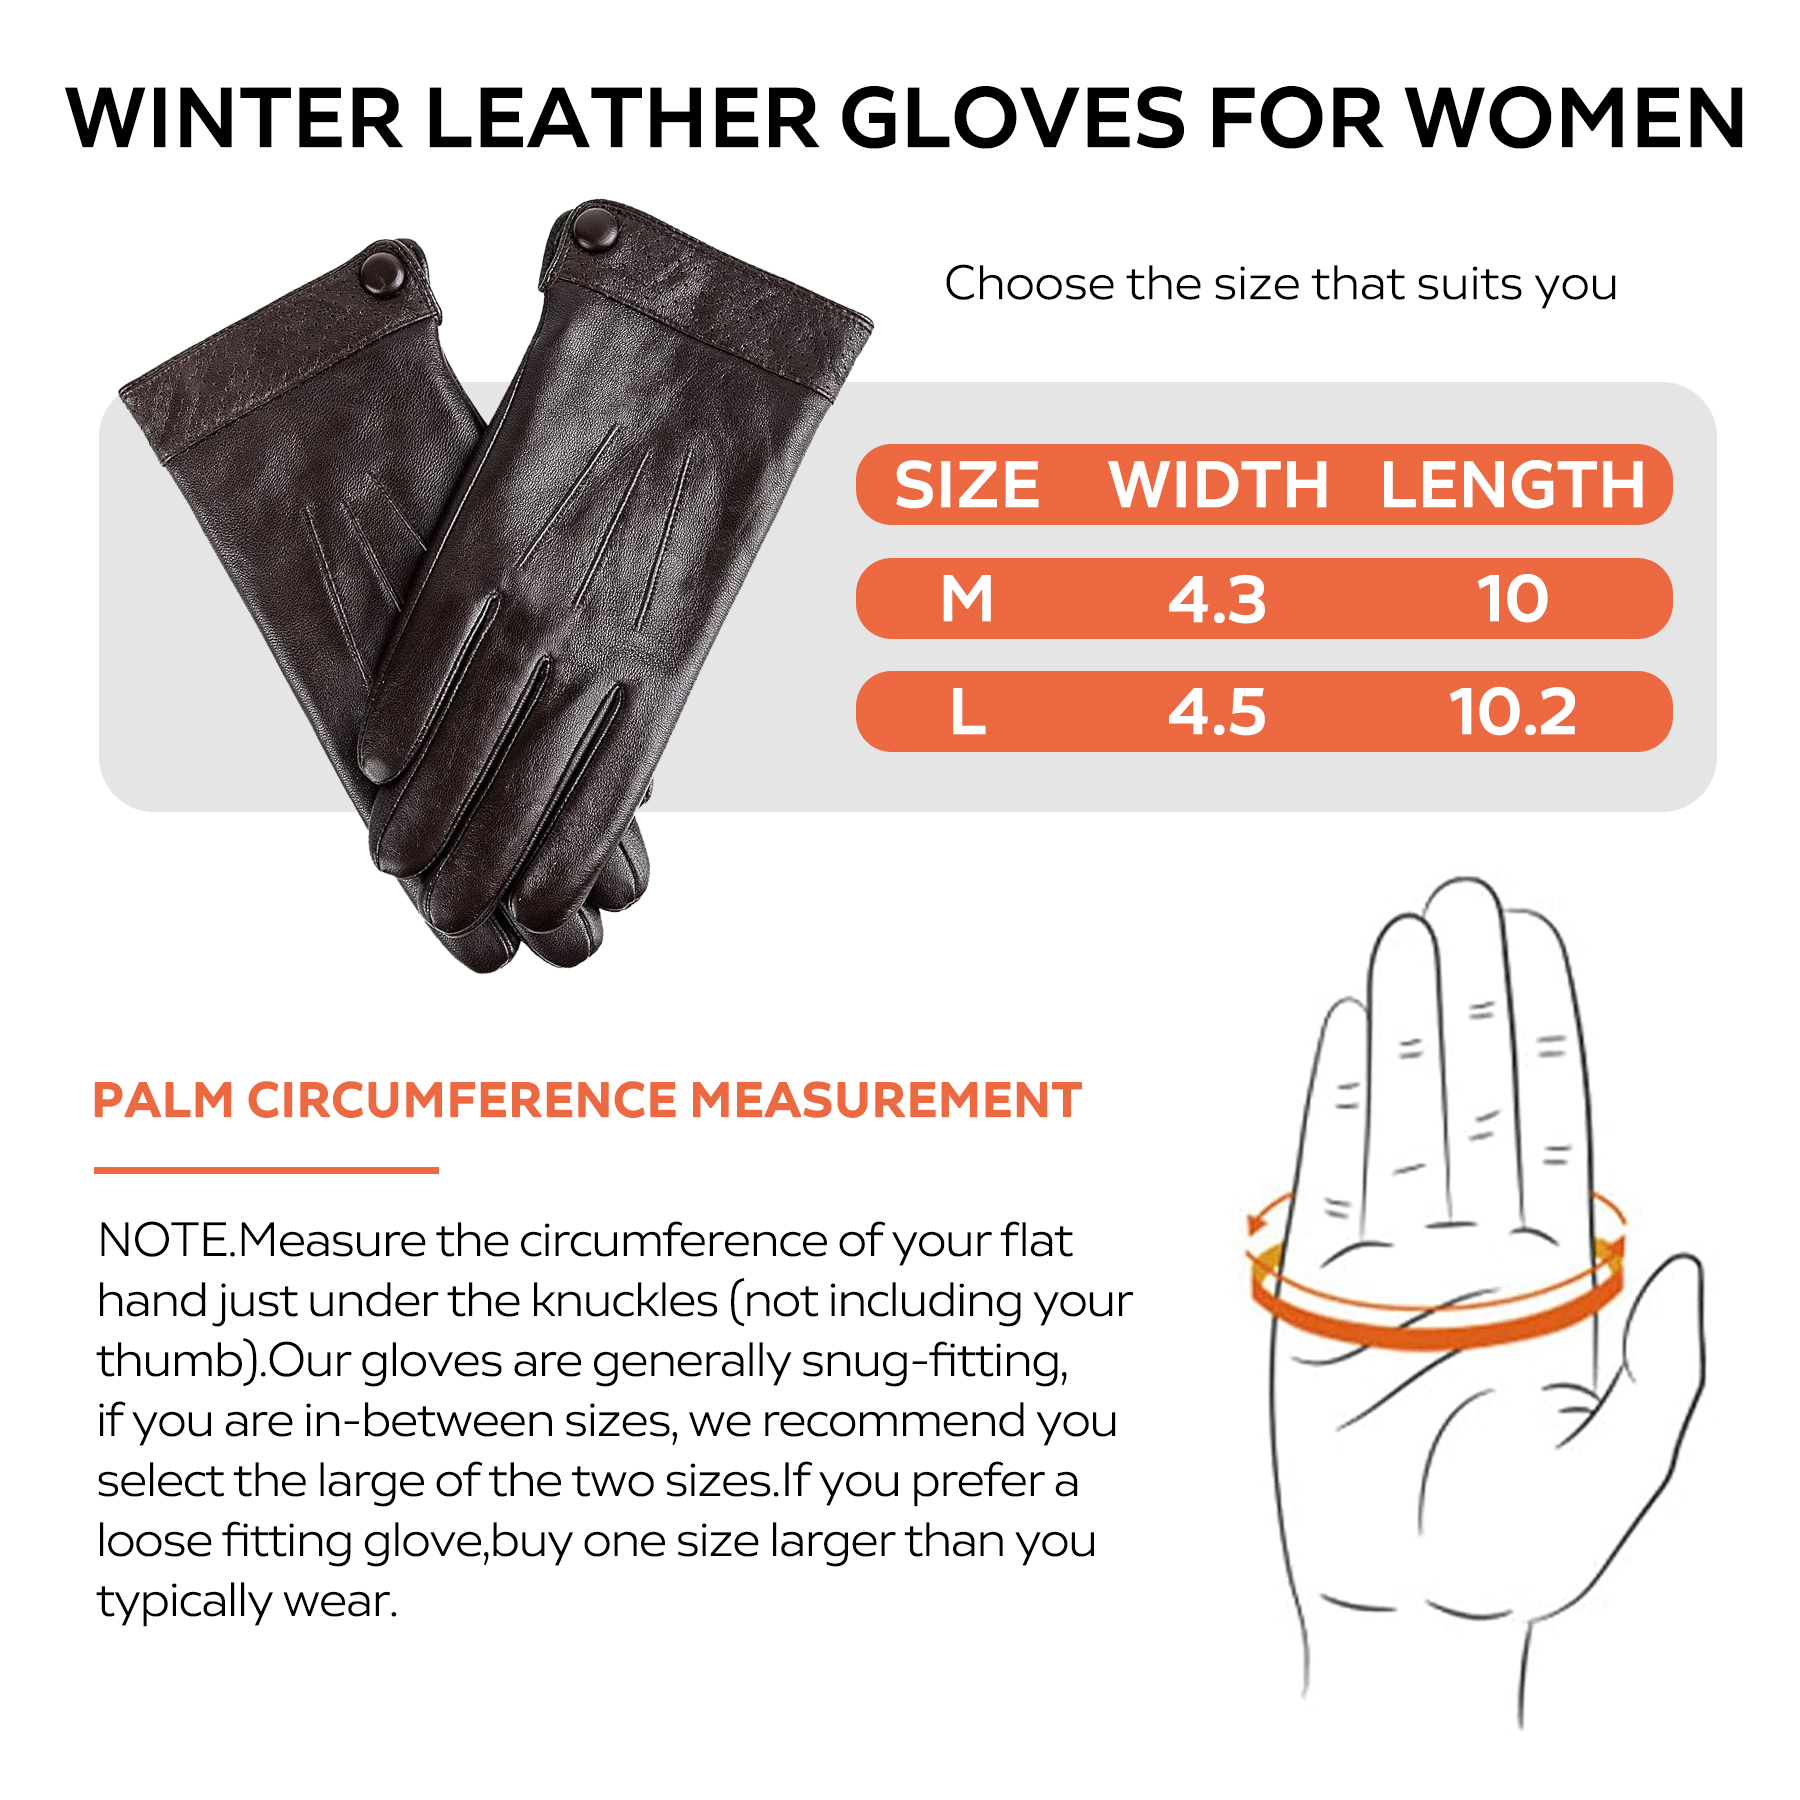 Whiteleopard Men's Winter Sheepskin Leather Gloves, Toasty Touchscreen Texting with Cashmere Lining, Ideal for Driving and Motorcycle Riding - image 3 of 7